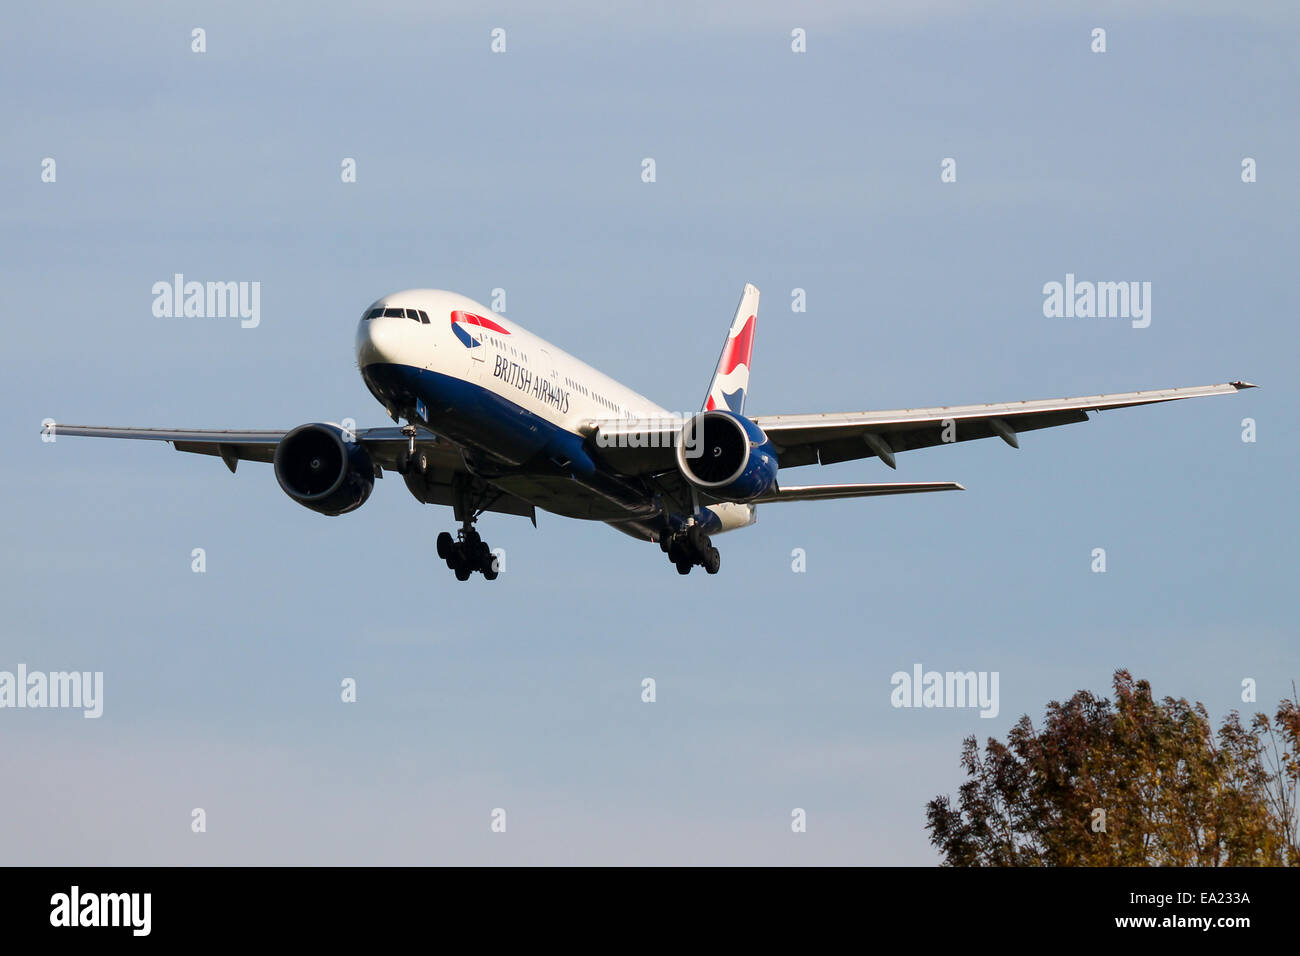 British Airways Boeing 777-200 approaches runway 27L at London Heathrow Airport. Stock Photo